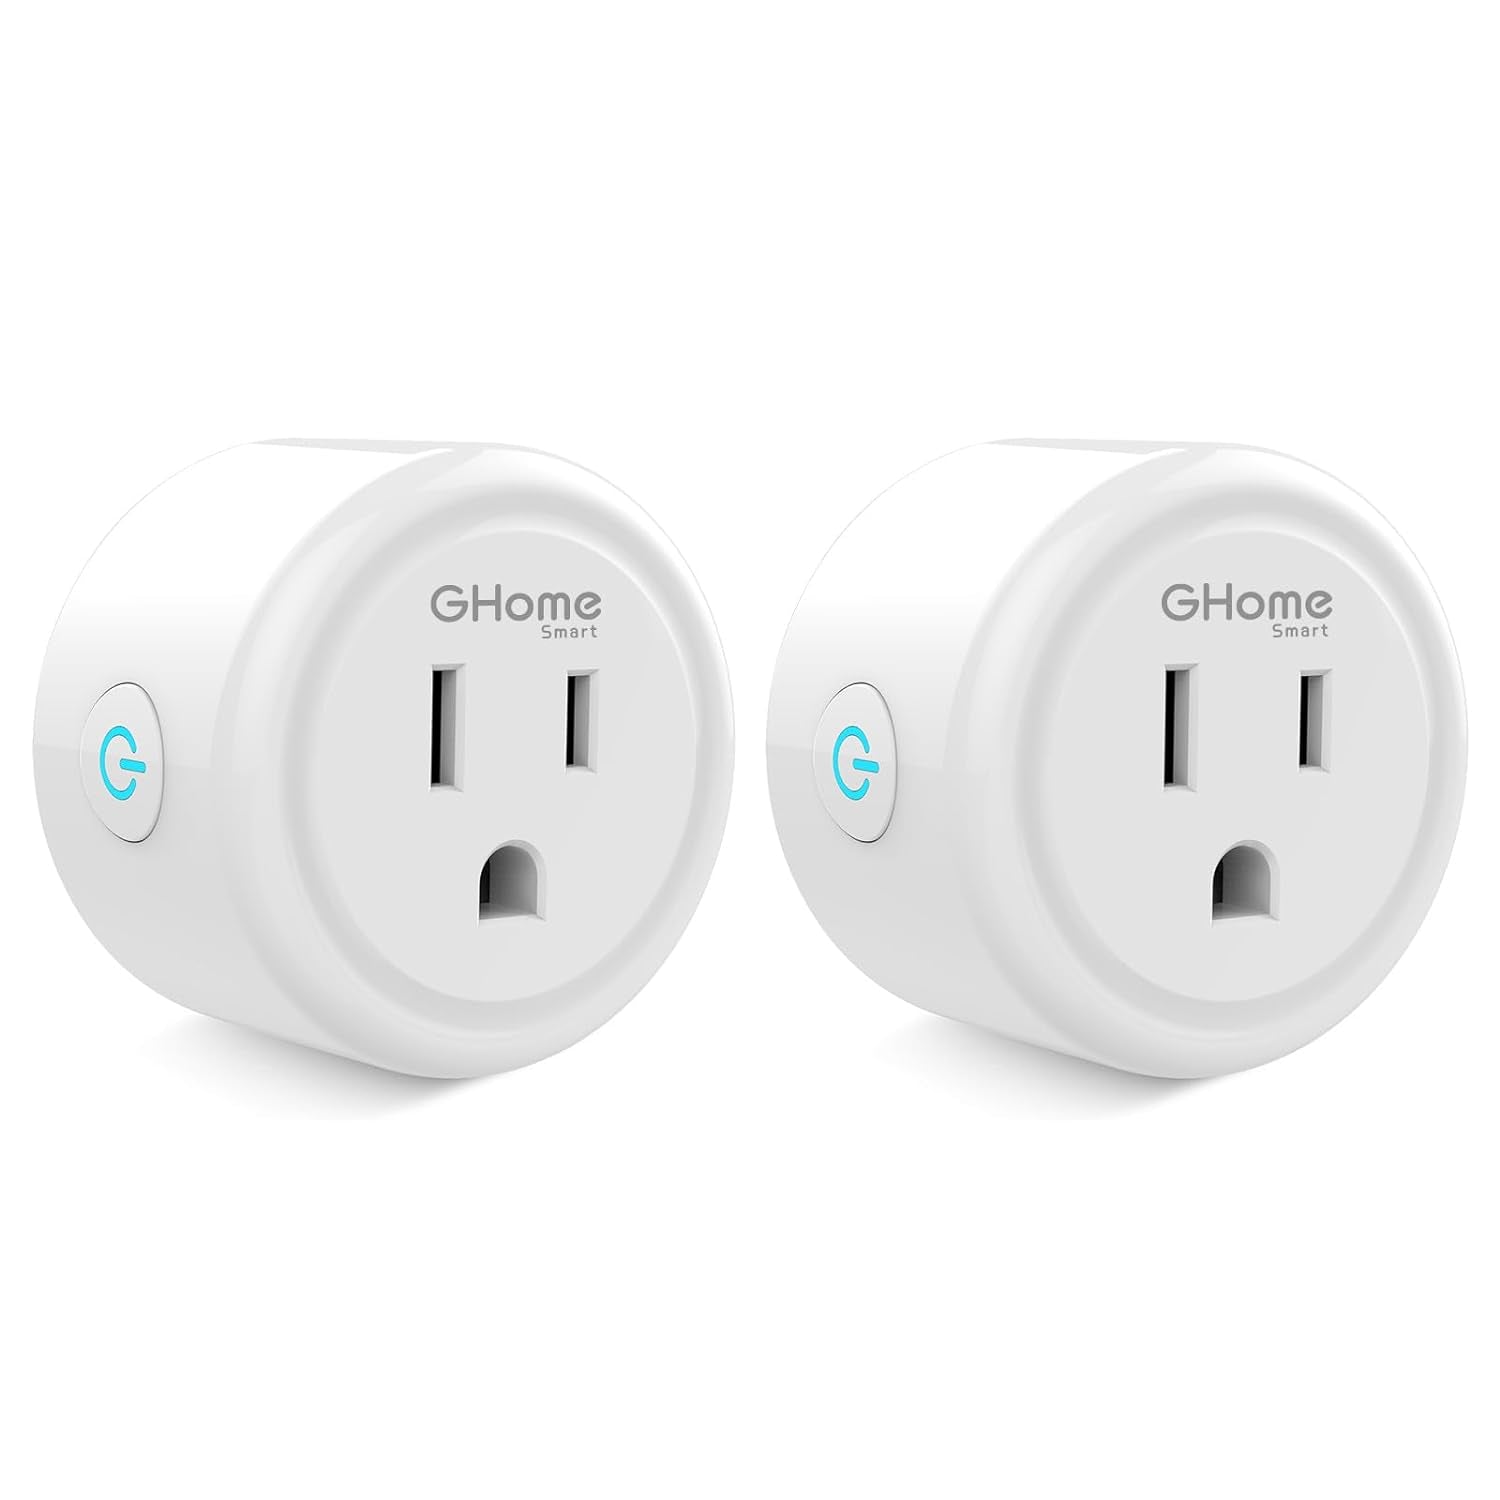 Smart Mini Plug Compatible with Alexa and Google Home, Wifi Outlet Socket Remote Control with Timer Function, Only Supports 2.4Ghz Network, No Hub Required, ETL FCC Listed (2 Pack), White